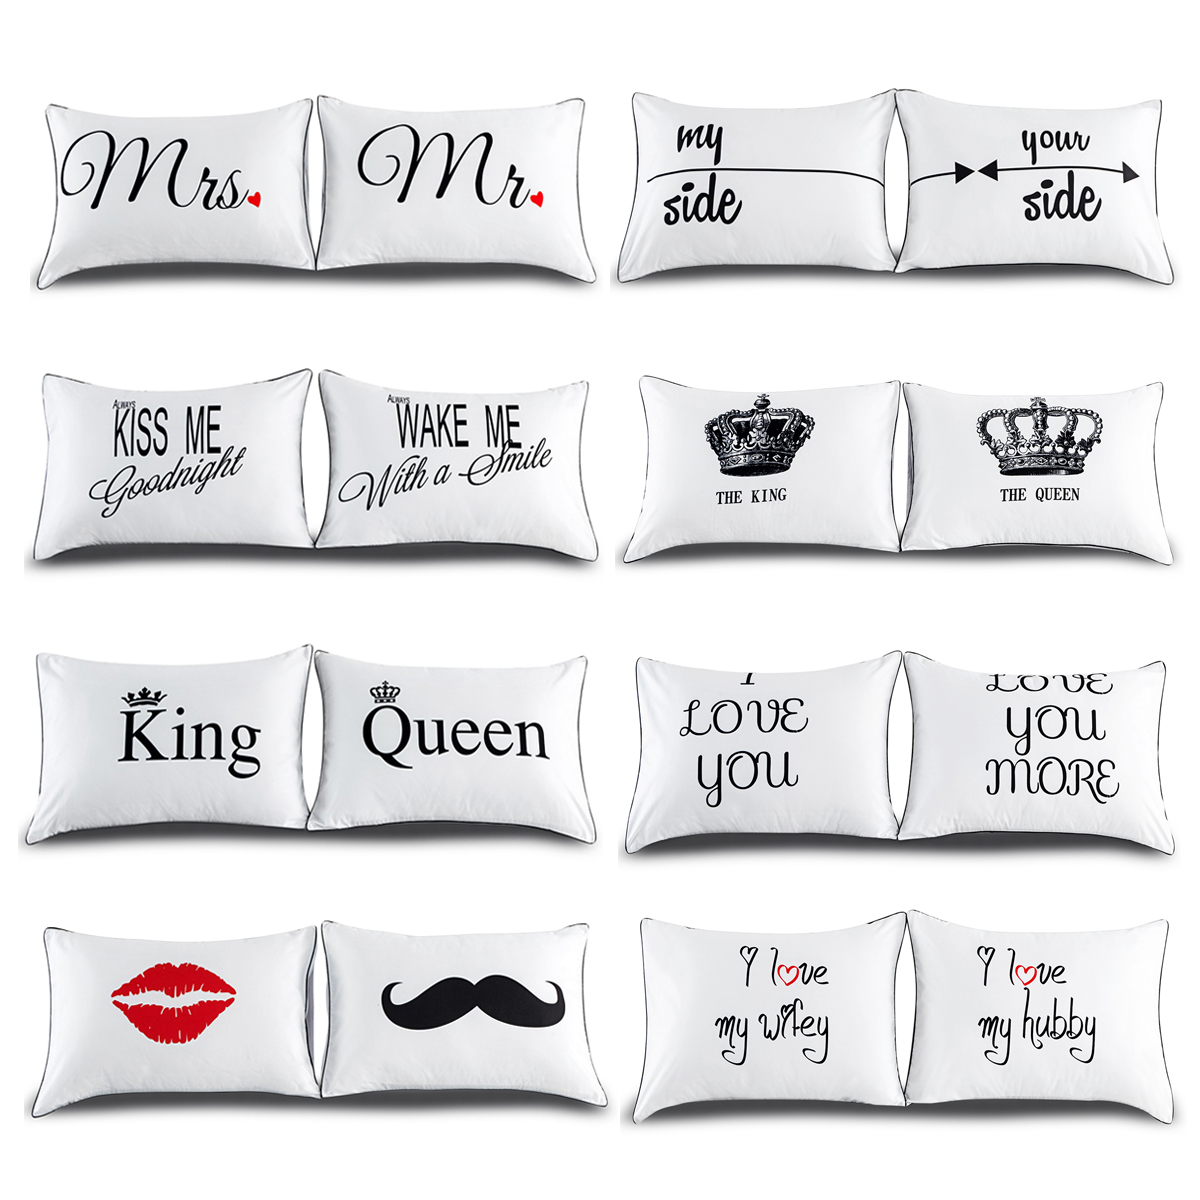 2PCS-White-Cotton-Home-Hotel-Decor-Standard-Pillow-Case-Bed-Throw-Cushion-Cover-1258866-1